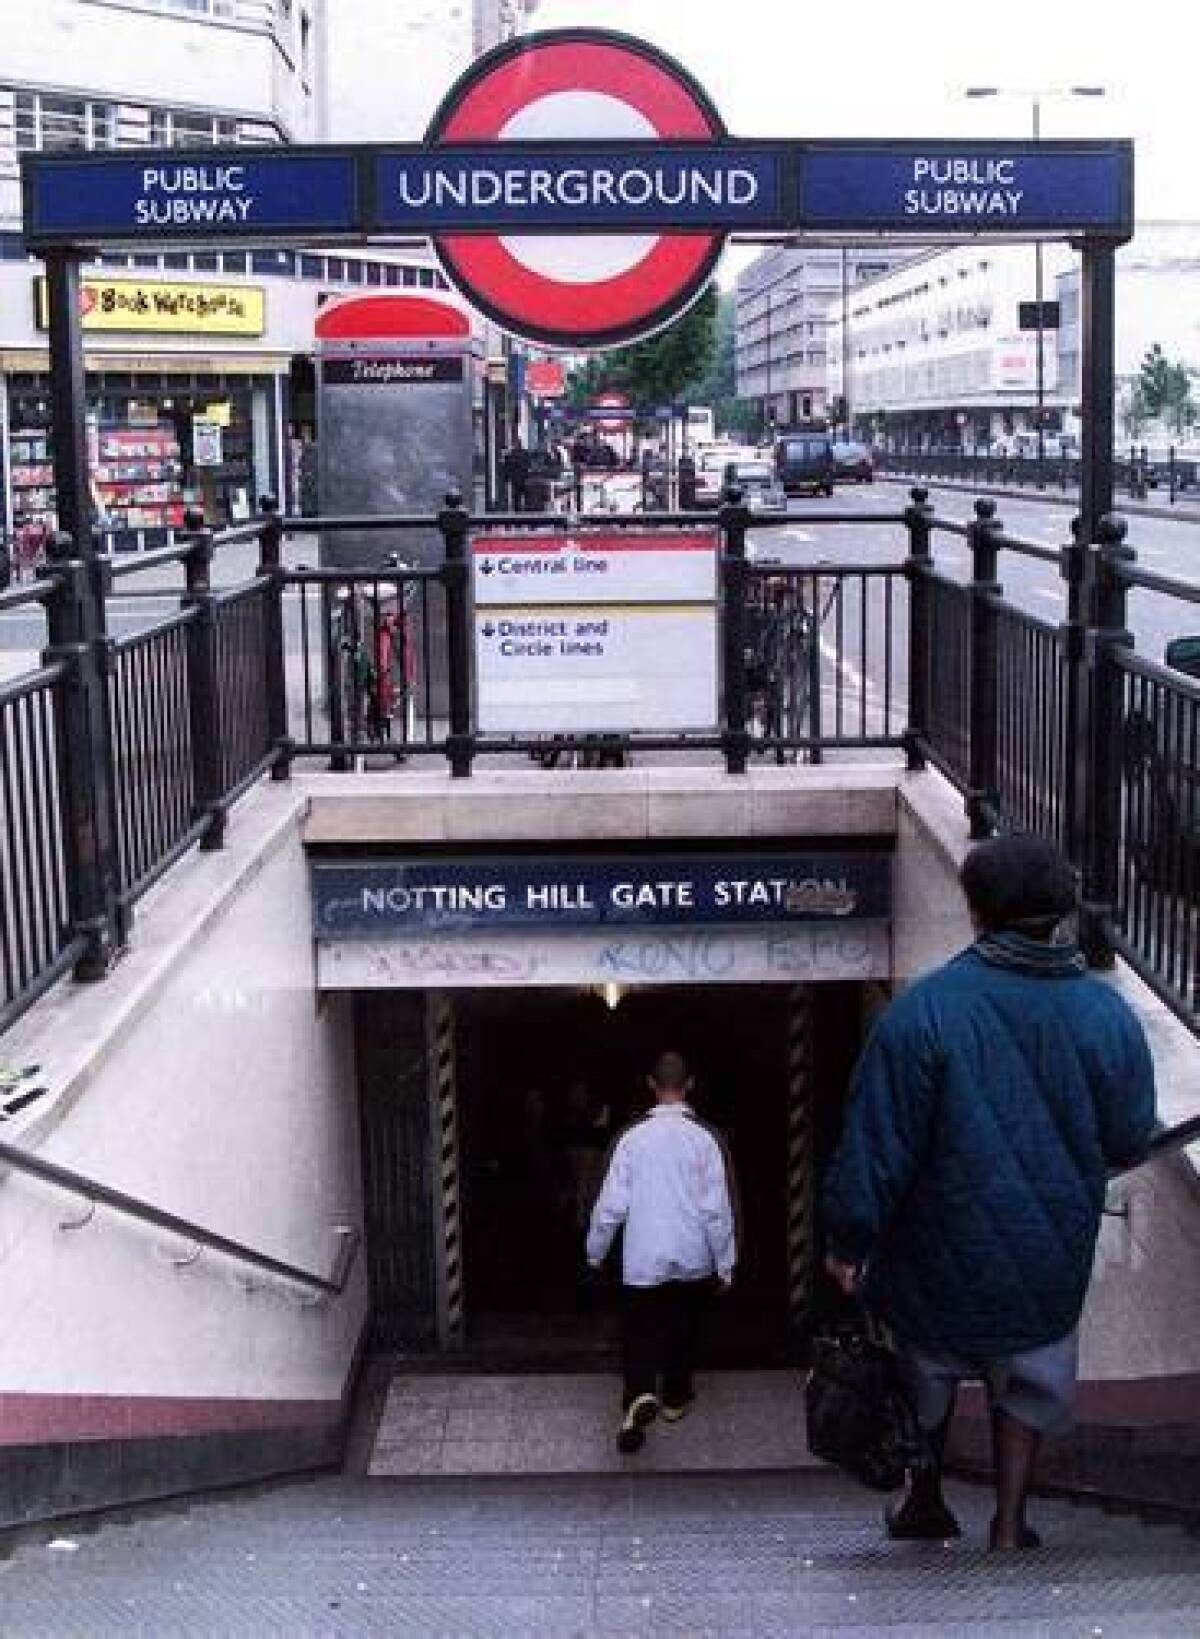 The Tube is one way to navigate London.